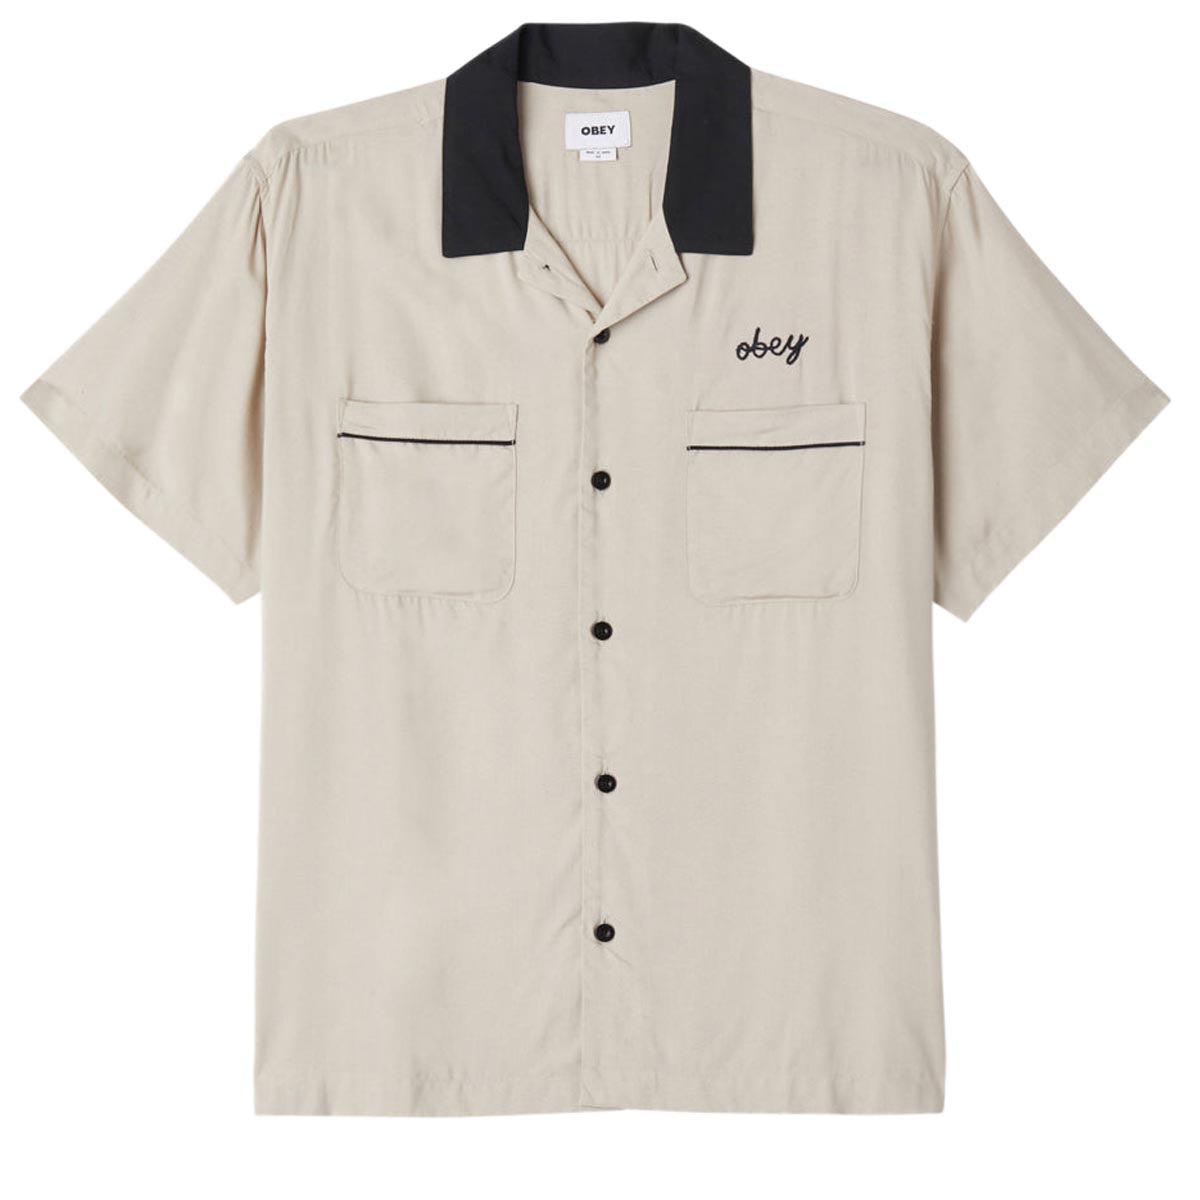 Obey Badger Woven Shirt - Silver Grey image 1